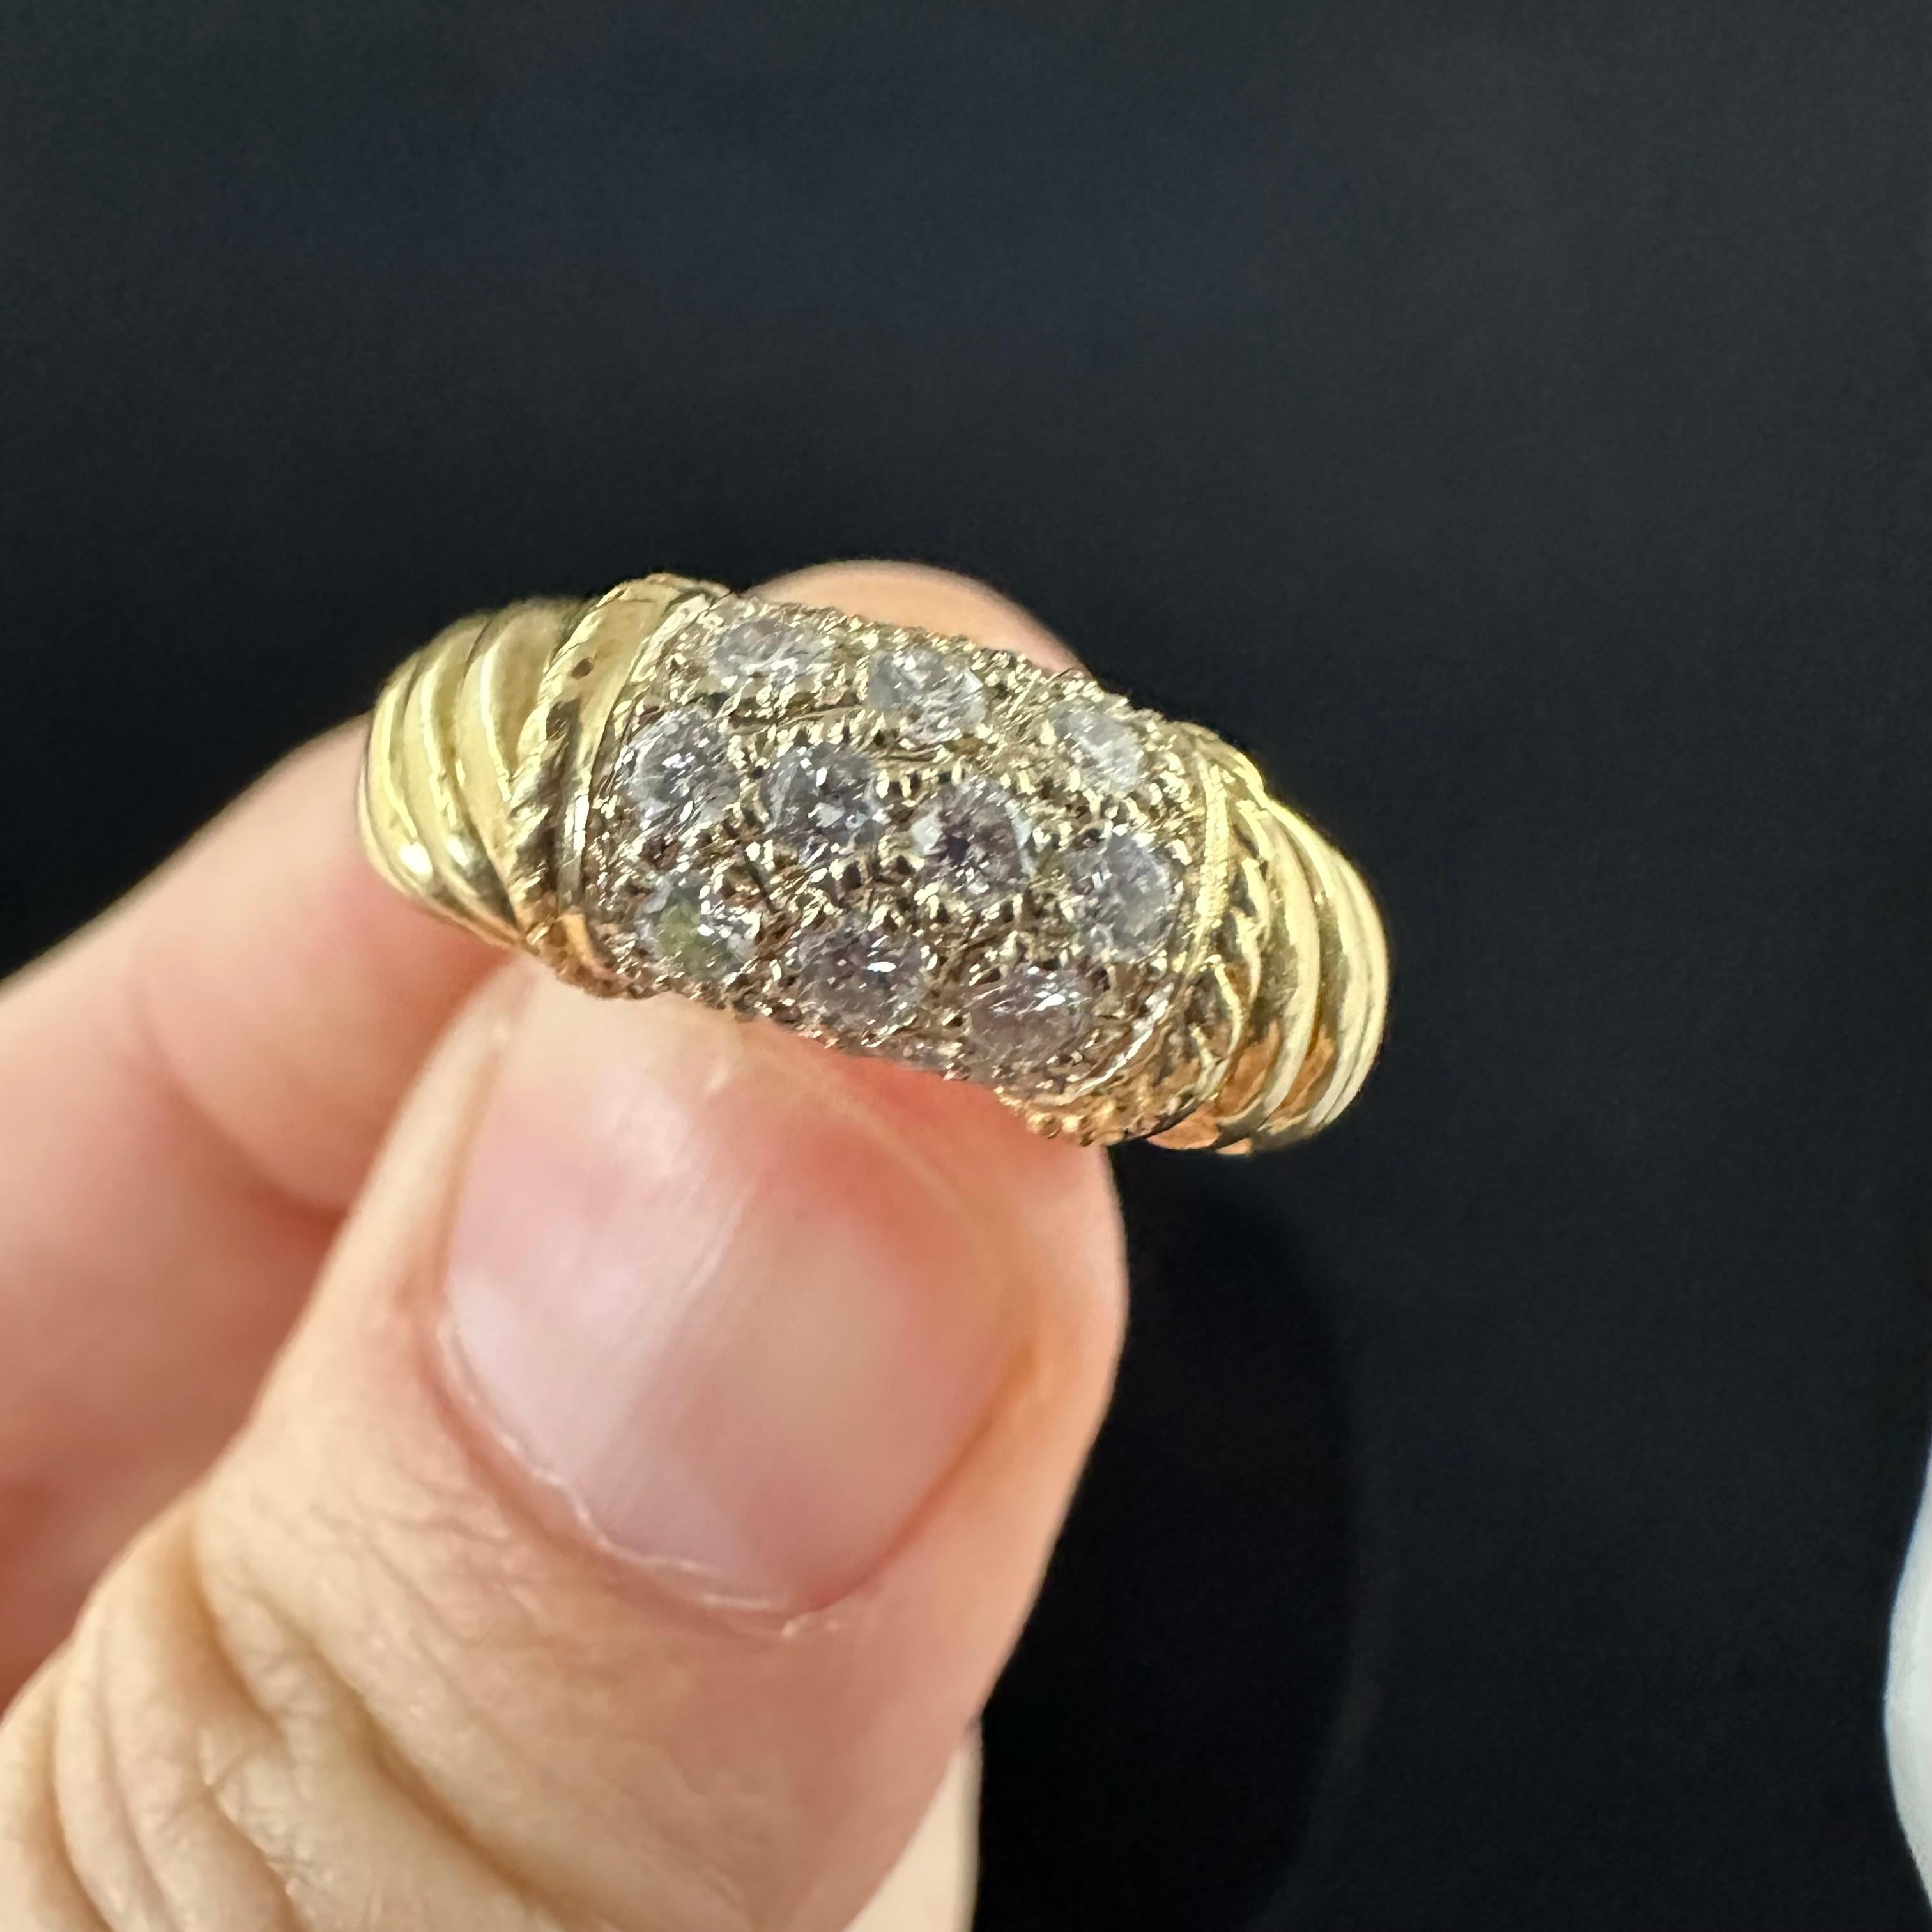 Yellow Gold 18k all Diamond VCA Philippine Ring Size 4 can be resized up a little. Hallmarked VCA numbered and the .50 ct Diamonds. 1968 this version was produced in many variations of hard stone sided although this one has textured gold side